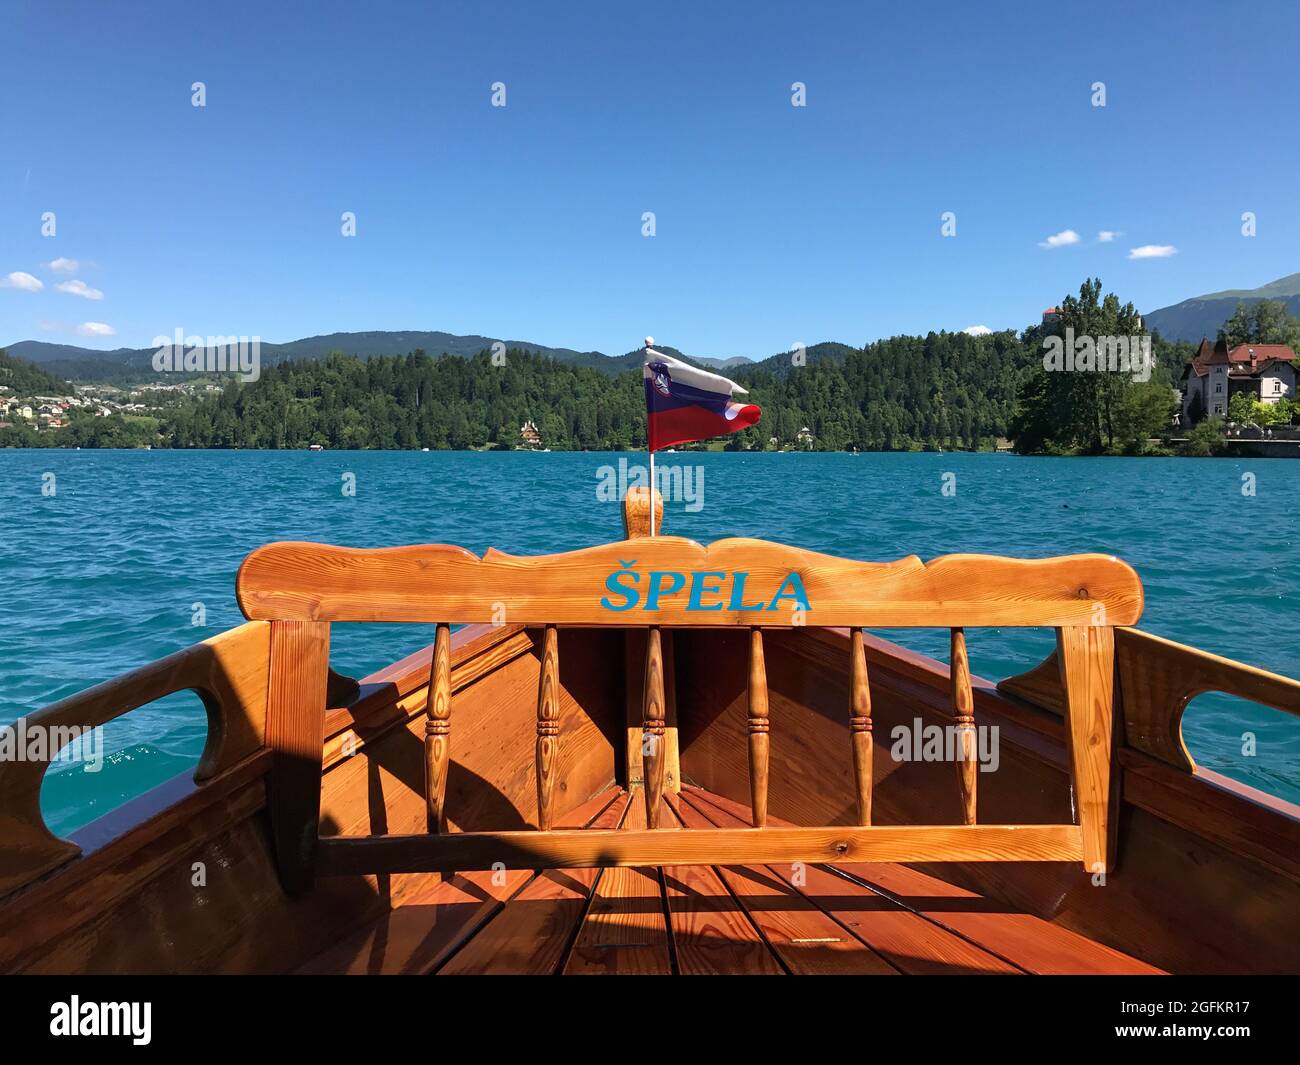 Typical tourist Boat at Lake Bled with Slovenian Flag Stock Photo